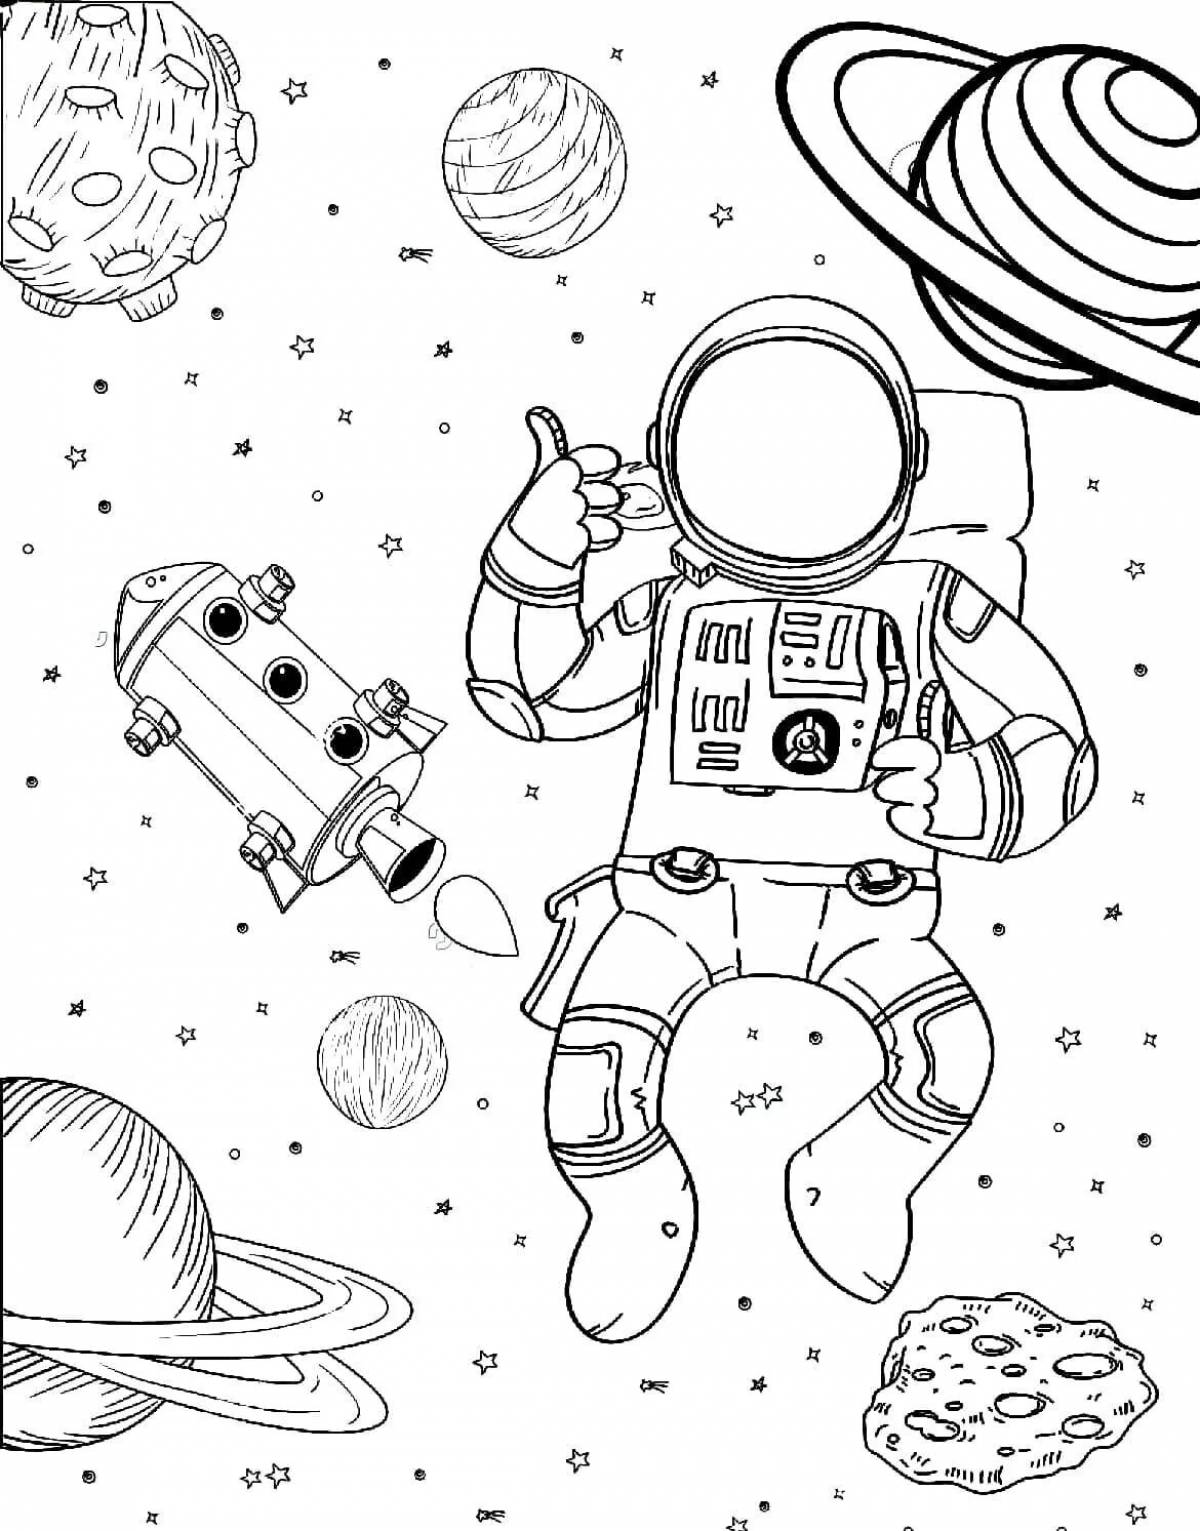 A wonderful astronaut in a spacesuit